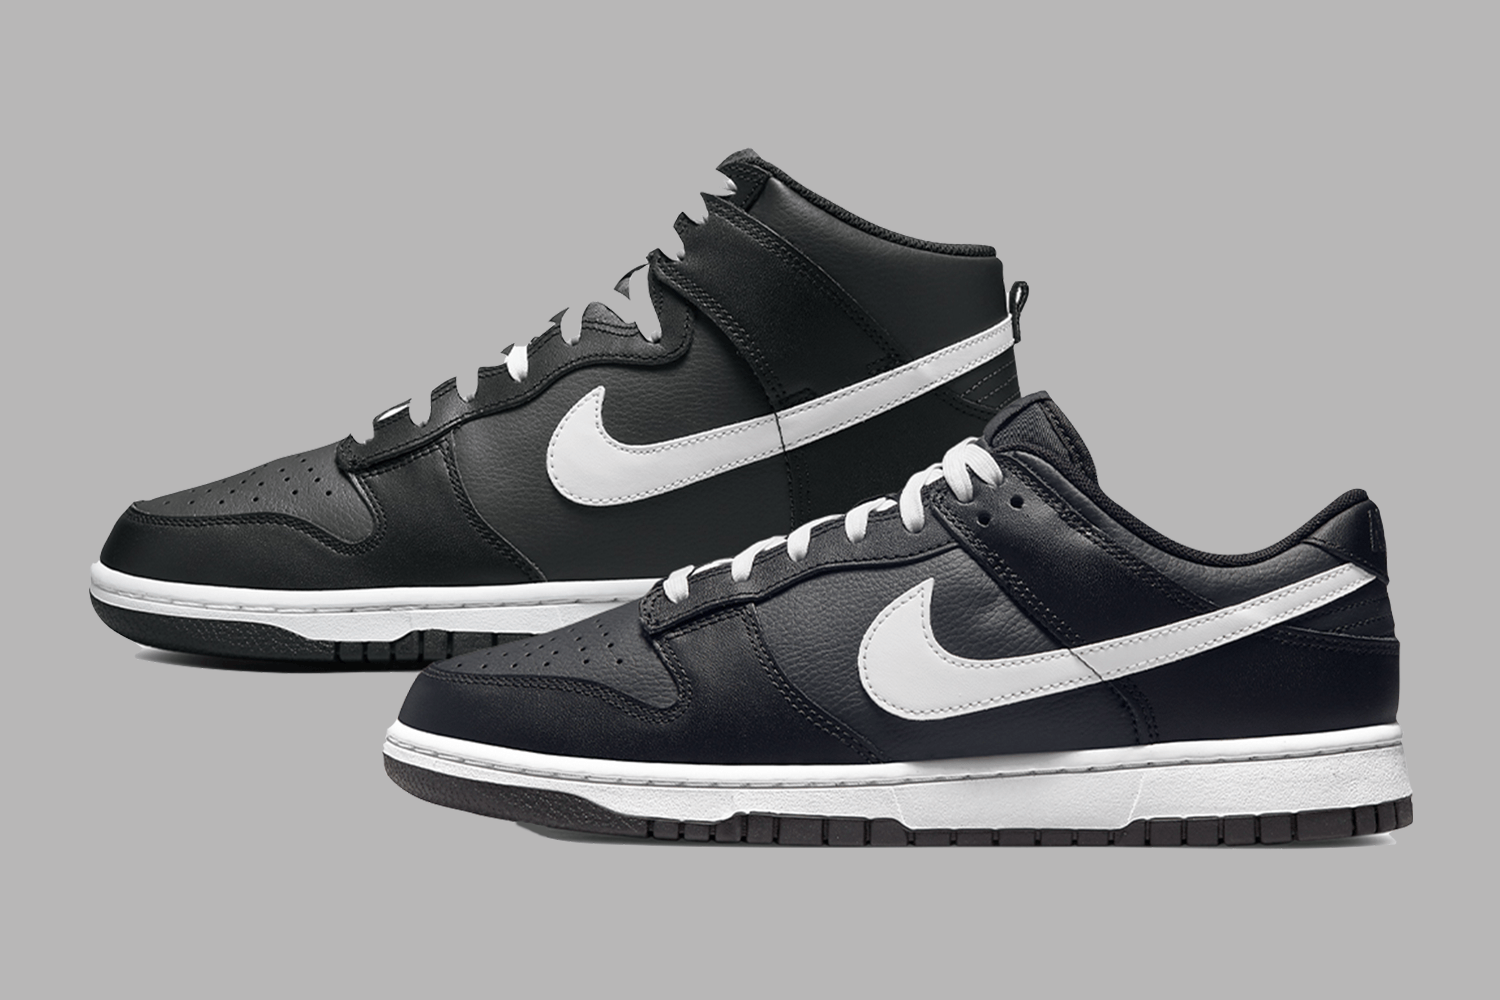 The running Nike Dunk Low & High will drop in a 'Black Panda' colorway